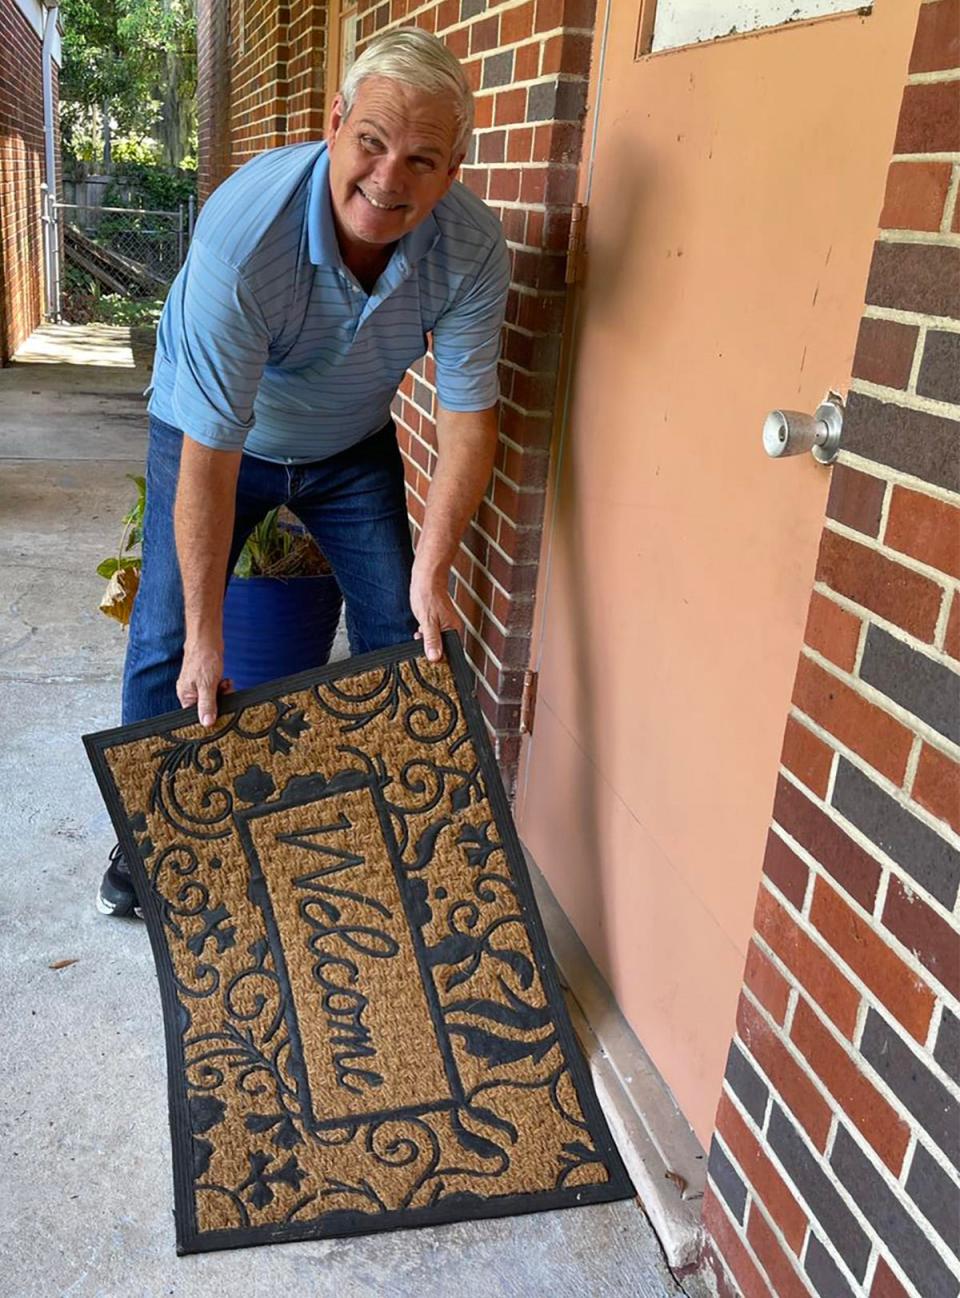 Executive Director Mark Landschoot (right) puts out the welcome mat at the new offices of Family Promise of Jacksonville, which helps homeless families and families at risk of becoming homeless.